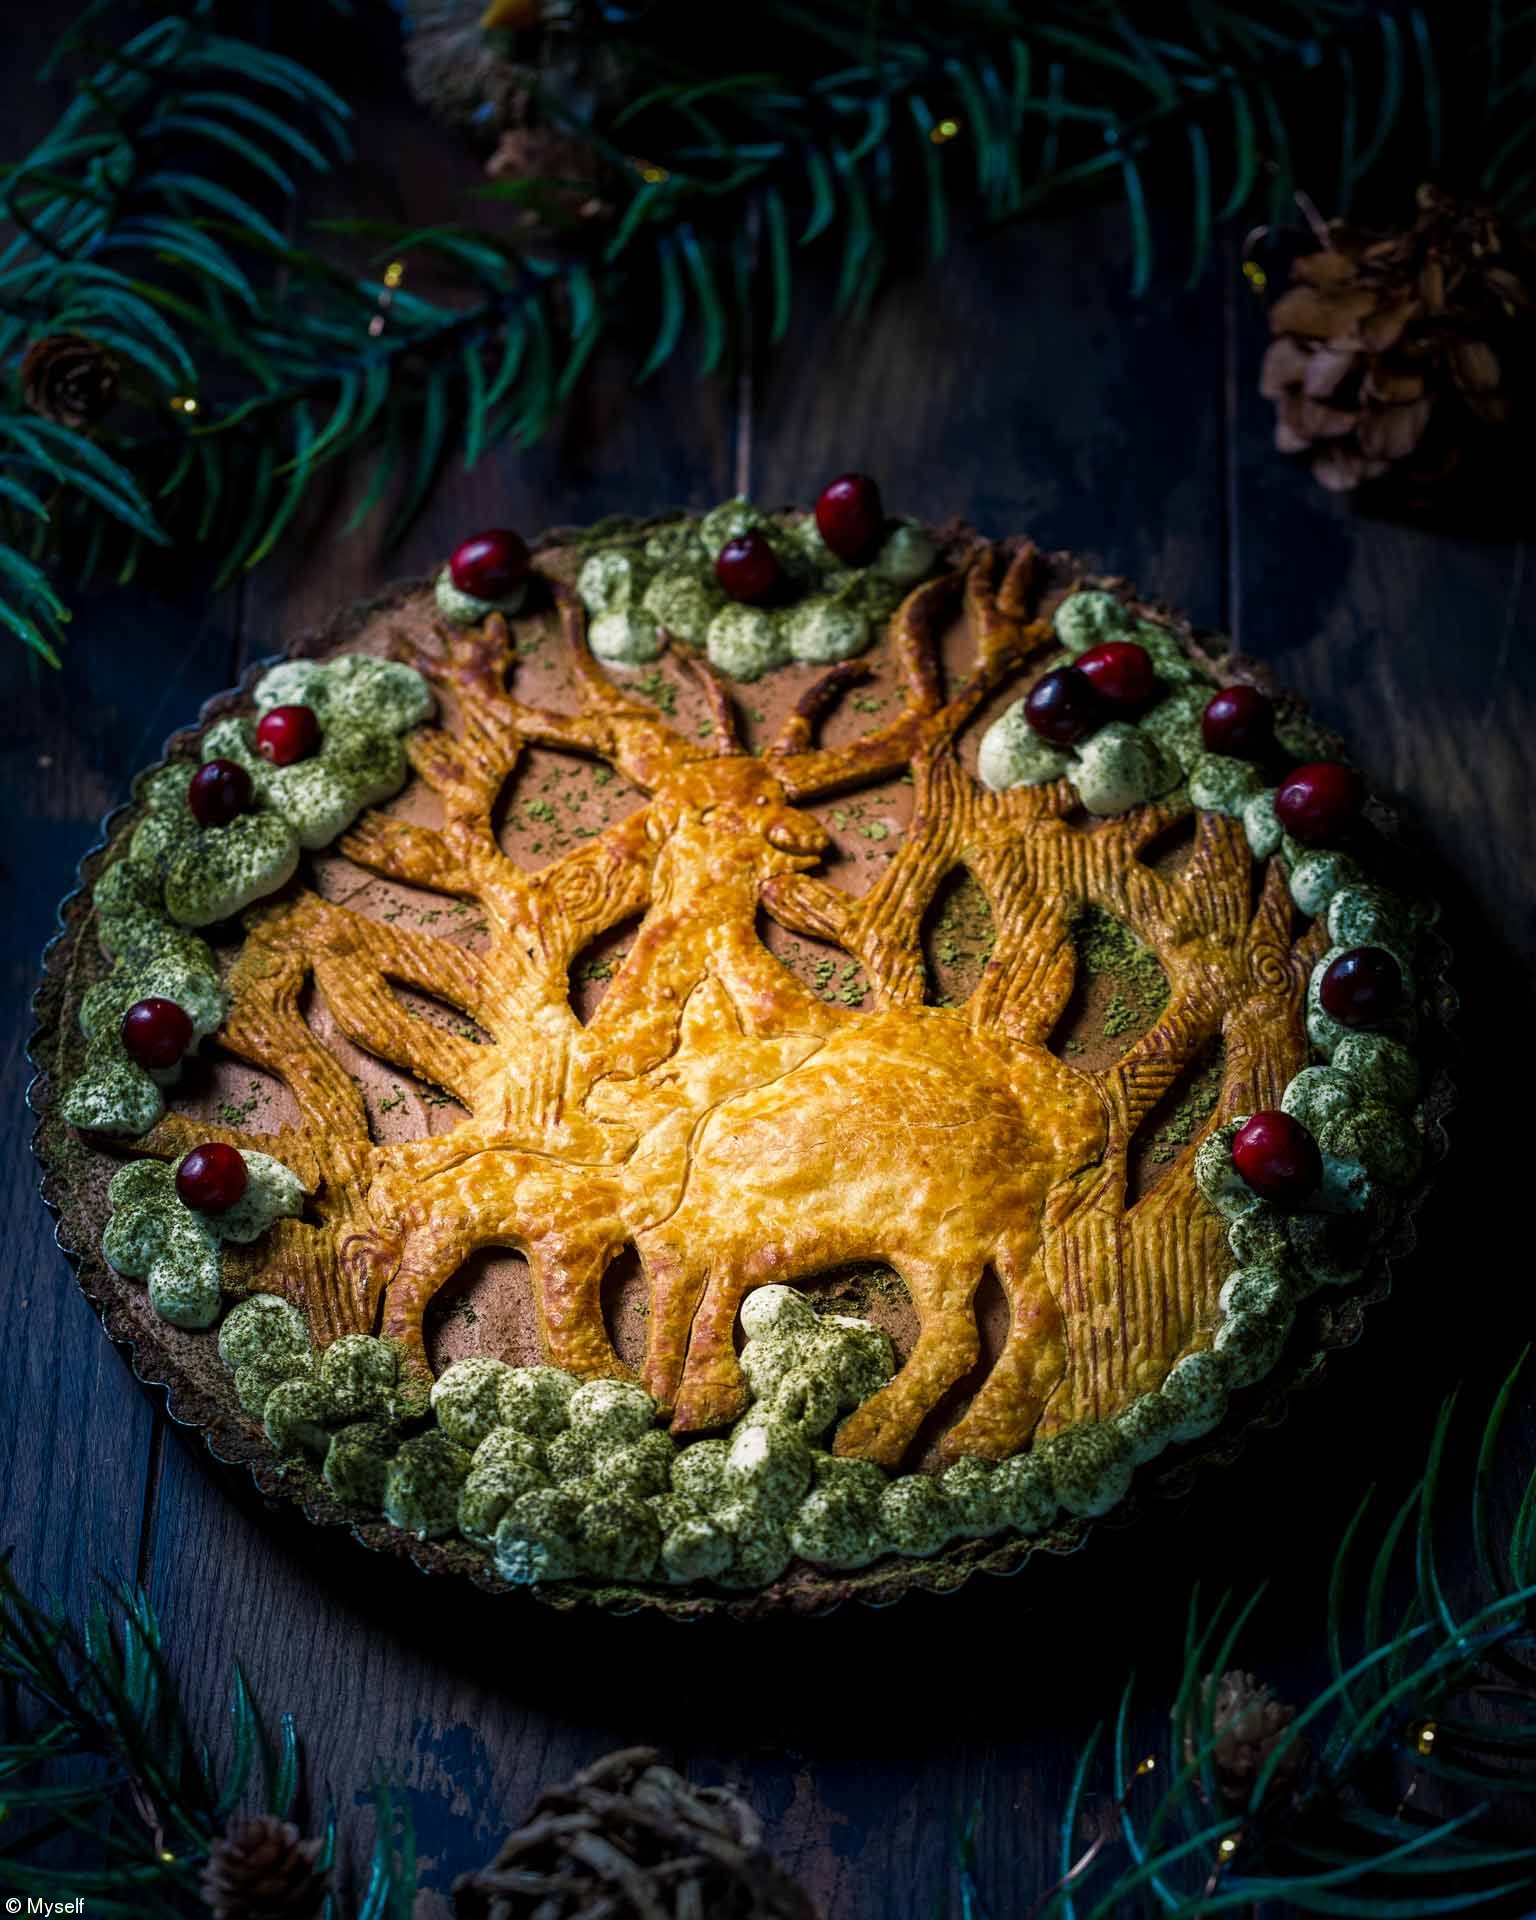 Pink Lady® Food Photographer of the Year festive photos